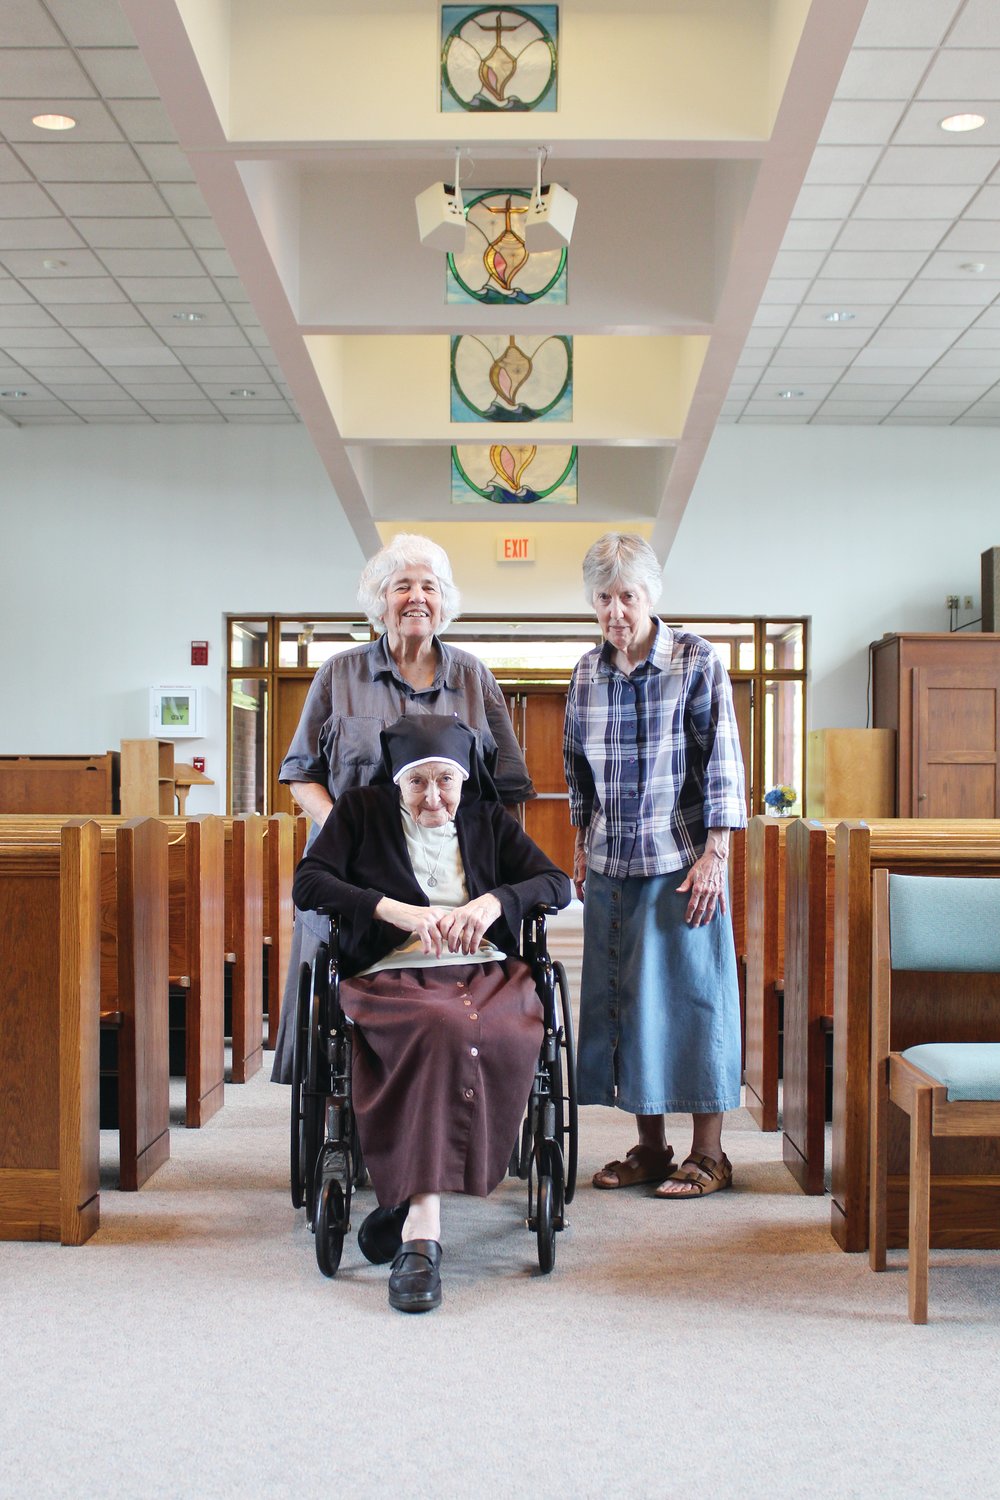 Standing from left, Sister Beth Shainin and Sister Sue Lumb, and Sister Patricia Keilty are three of the remaining six religious sisters of the Monastery of Our Lady of Mount Carmel and St. Therese in Barrington.